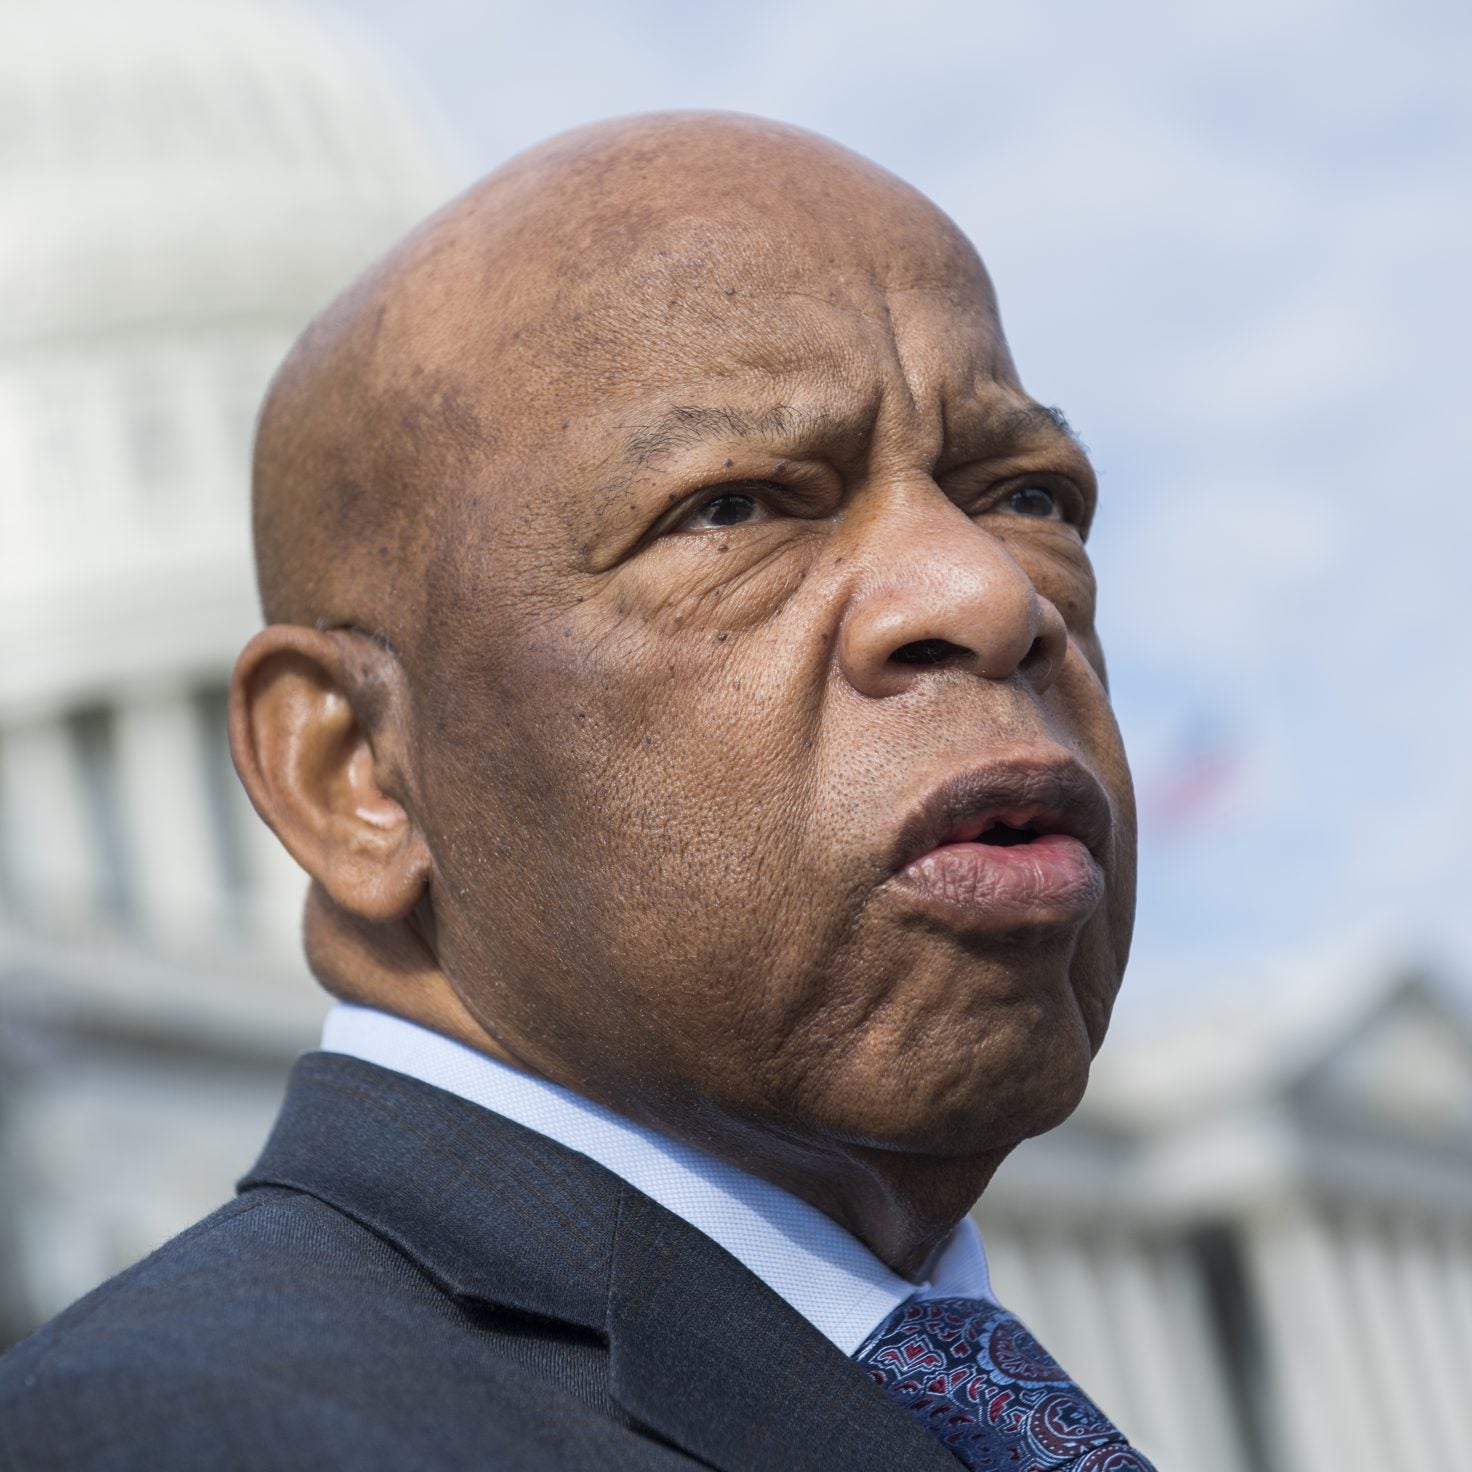 Rep. John Lewis Urges Americans To 'Stand Up For What You Truly Believe' In Posthumous Op-Ed